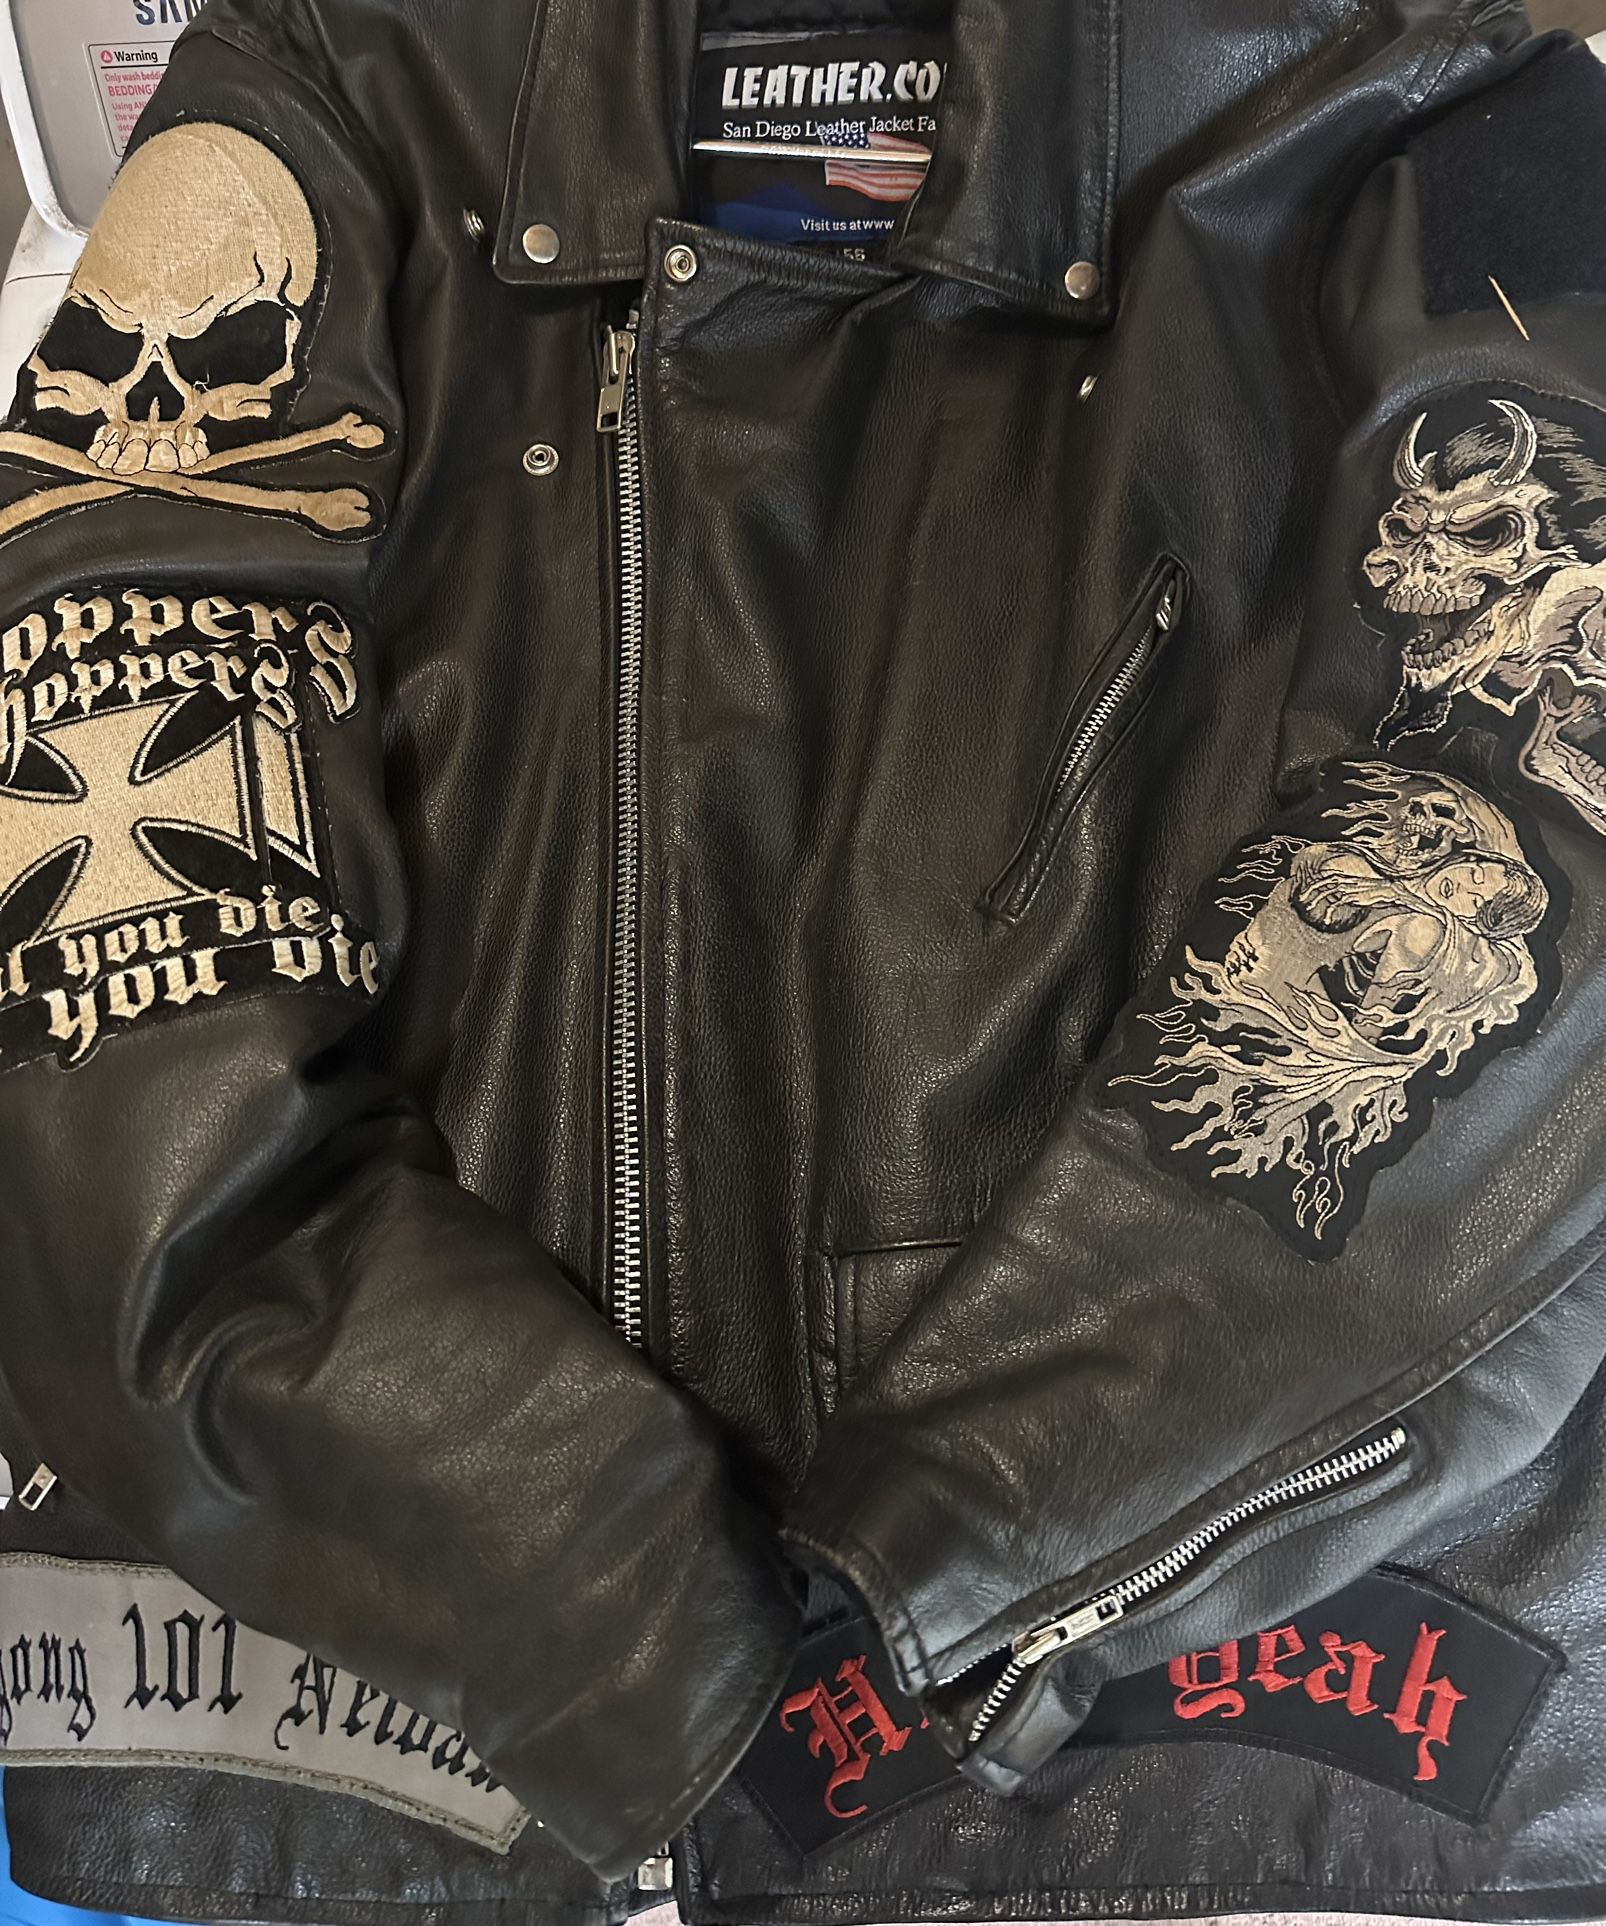 Biker Jacket Custom -Best Reasonable Offers Only Please Any Questions Feel Free To Ask 